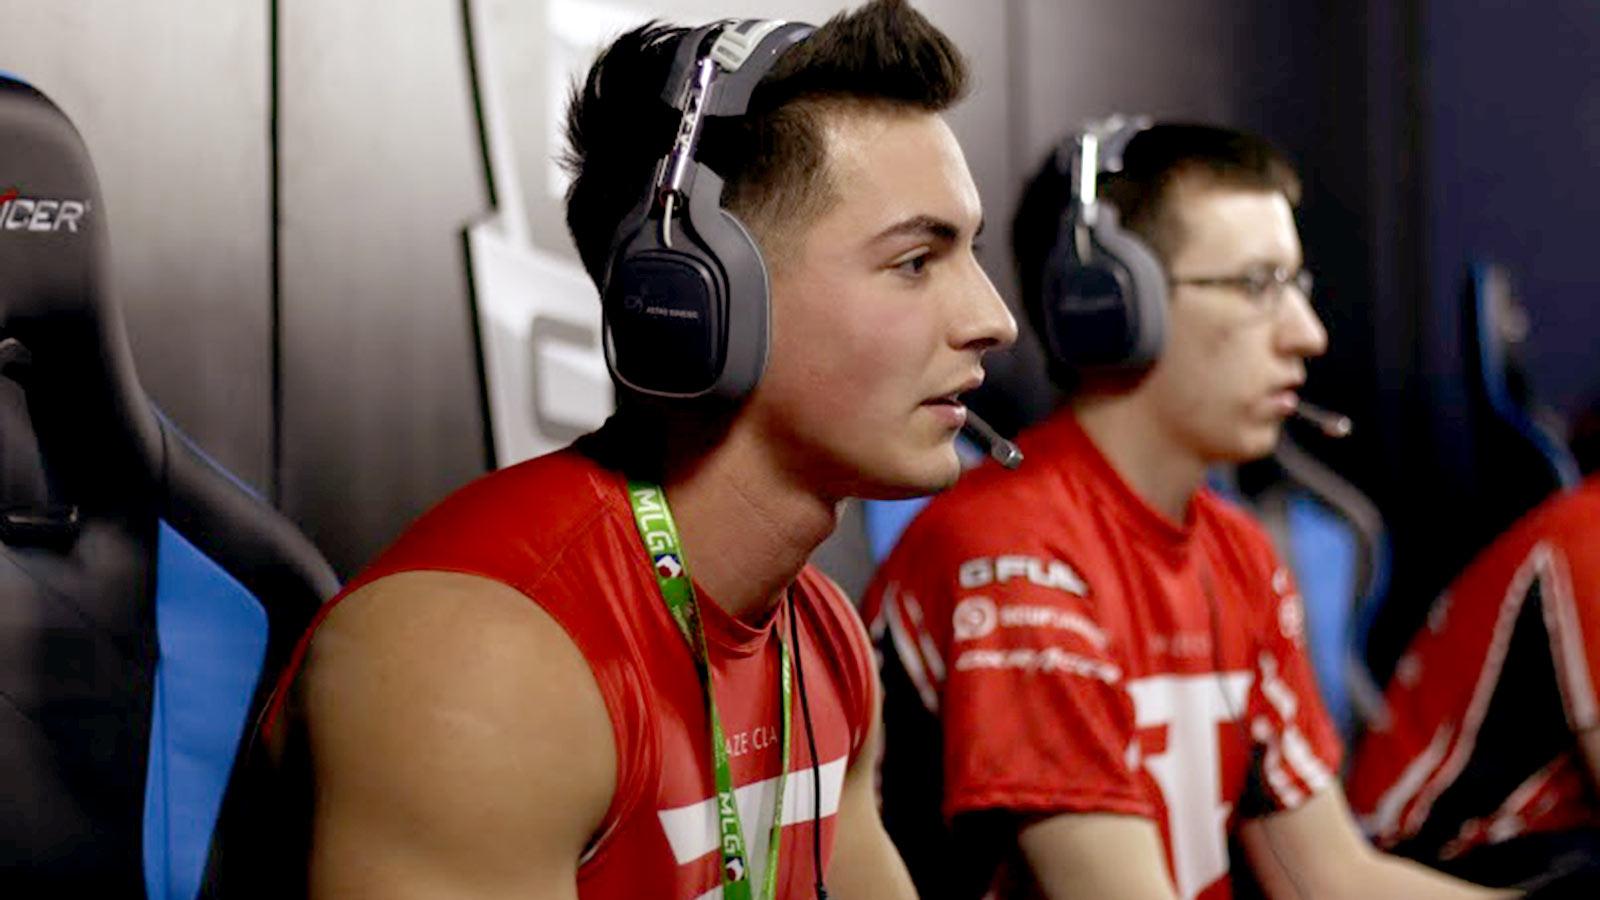 Censor playing for FaZe Clan.